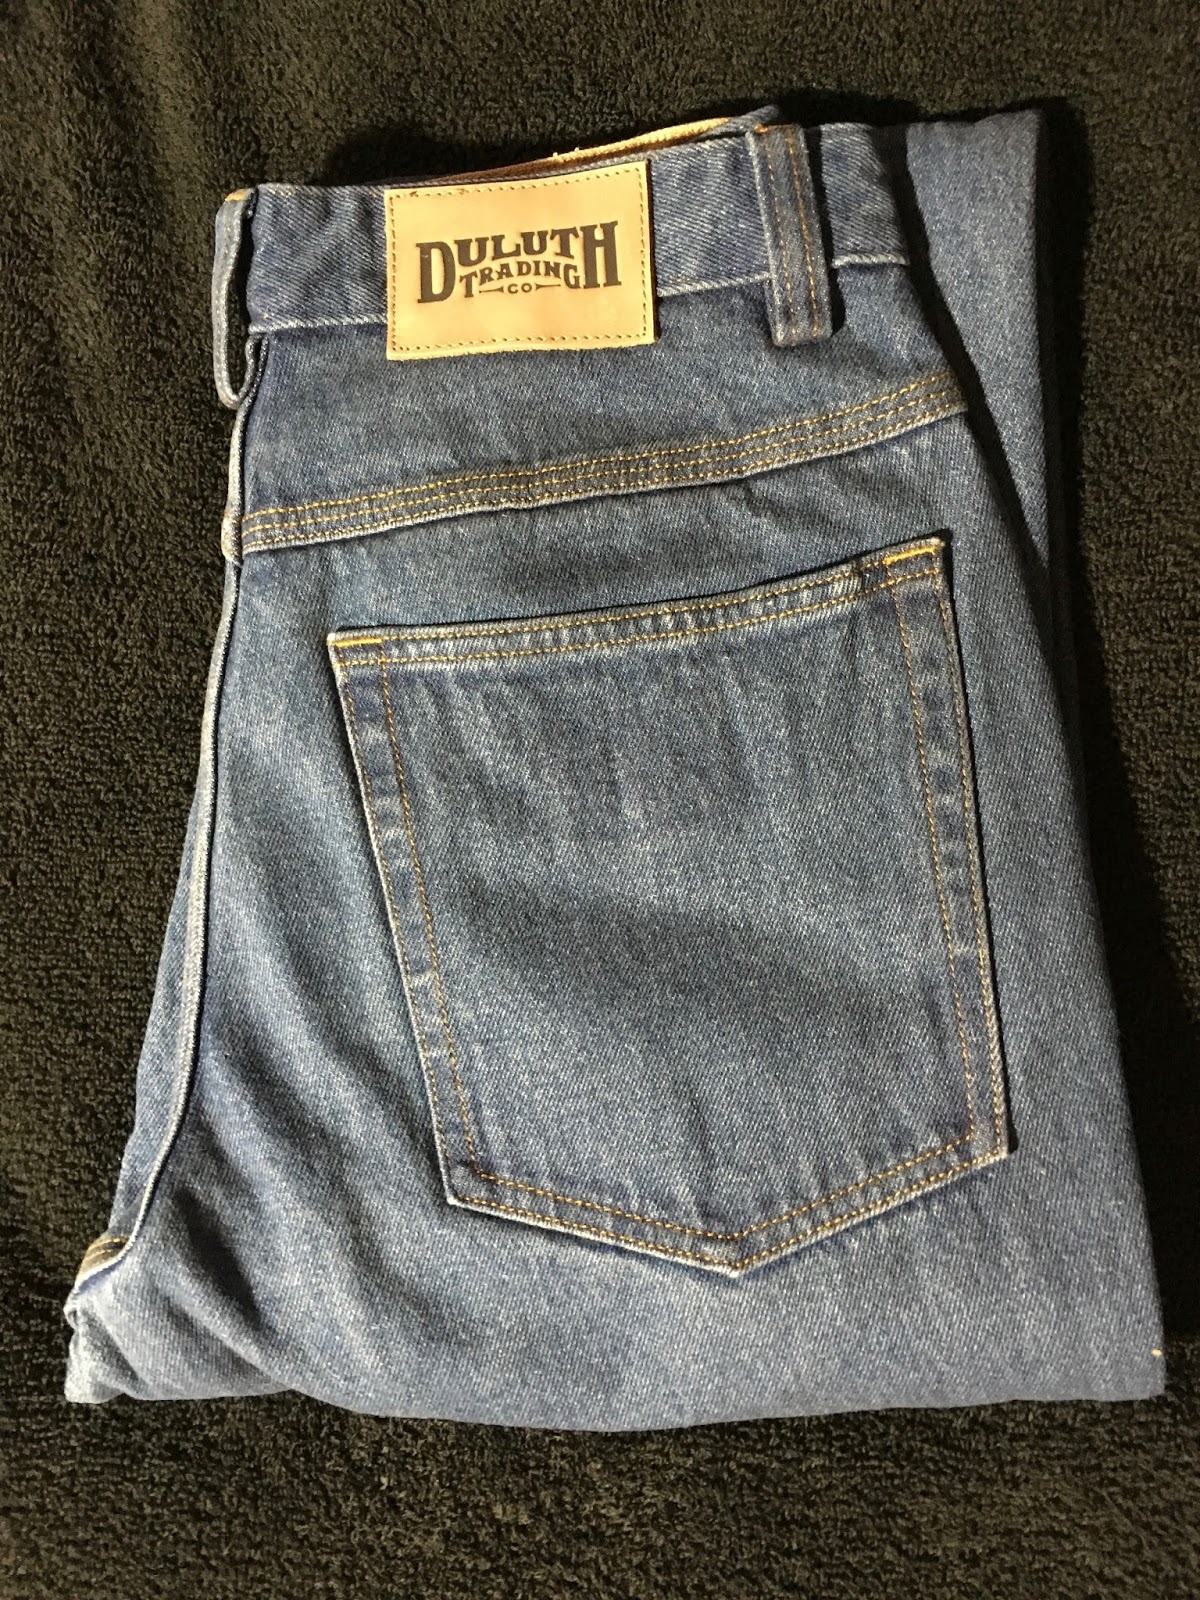 duluth trading company jeans